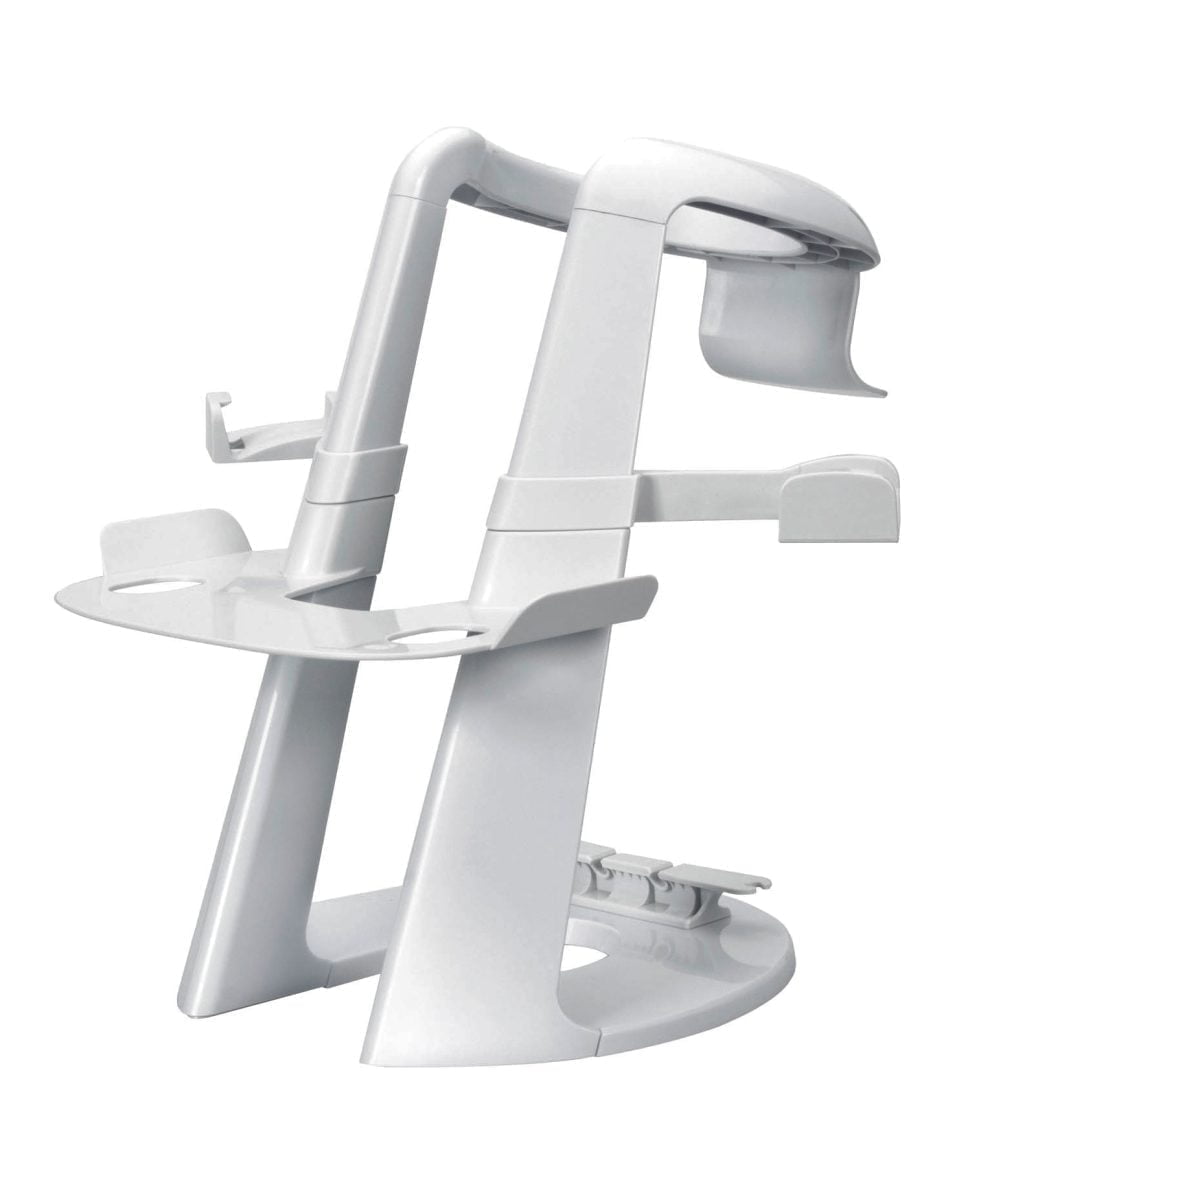 6473847Cv12D &Lt;H1&Gt;Stand For Oculus - White&Lt;/H1&Gt; The Insignia Oculus Stand Is Specially Designed For Displaying And Storing Your Oculus Vr Headset And Touch Controllers. Built With A No-Slip Base, This Stand Is A Safe And Stable To Place To Store And Organize Your Vr Headset, Controllers And Cables. Compatible With Most Vr Systems Including The Oculus Series (Oculus Rift/Rift S/Quest/Quest 2) Vr Headset And Controllers Oculus Stand Insignia Stand For Oculus - White